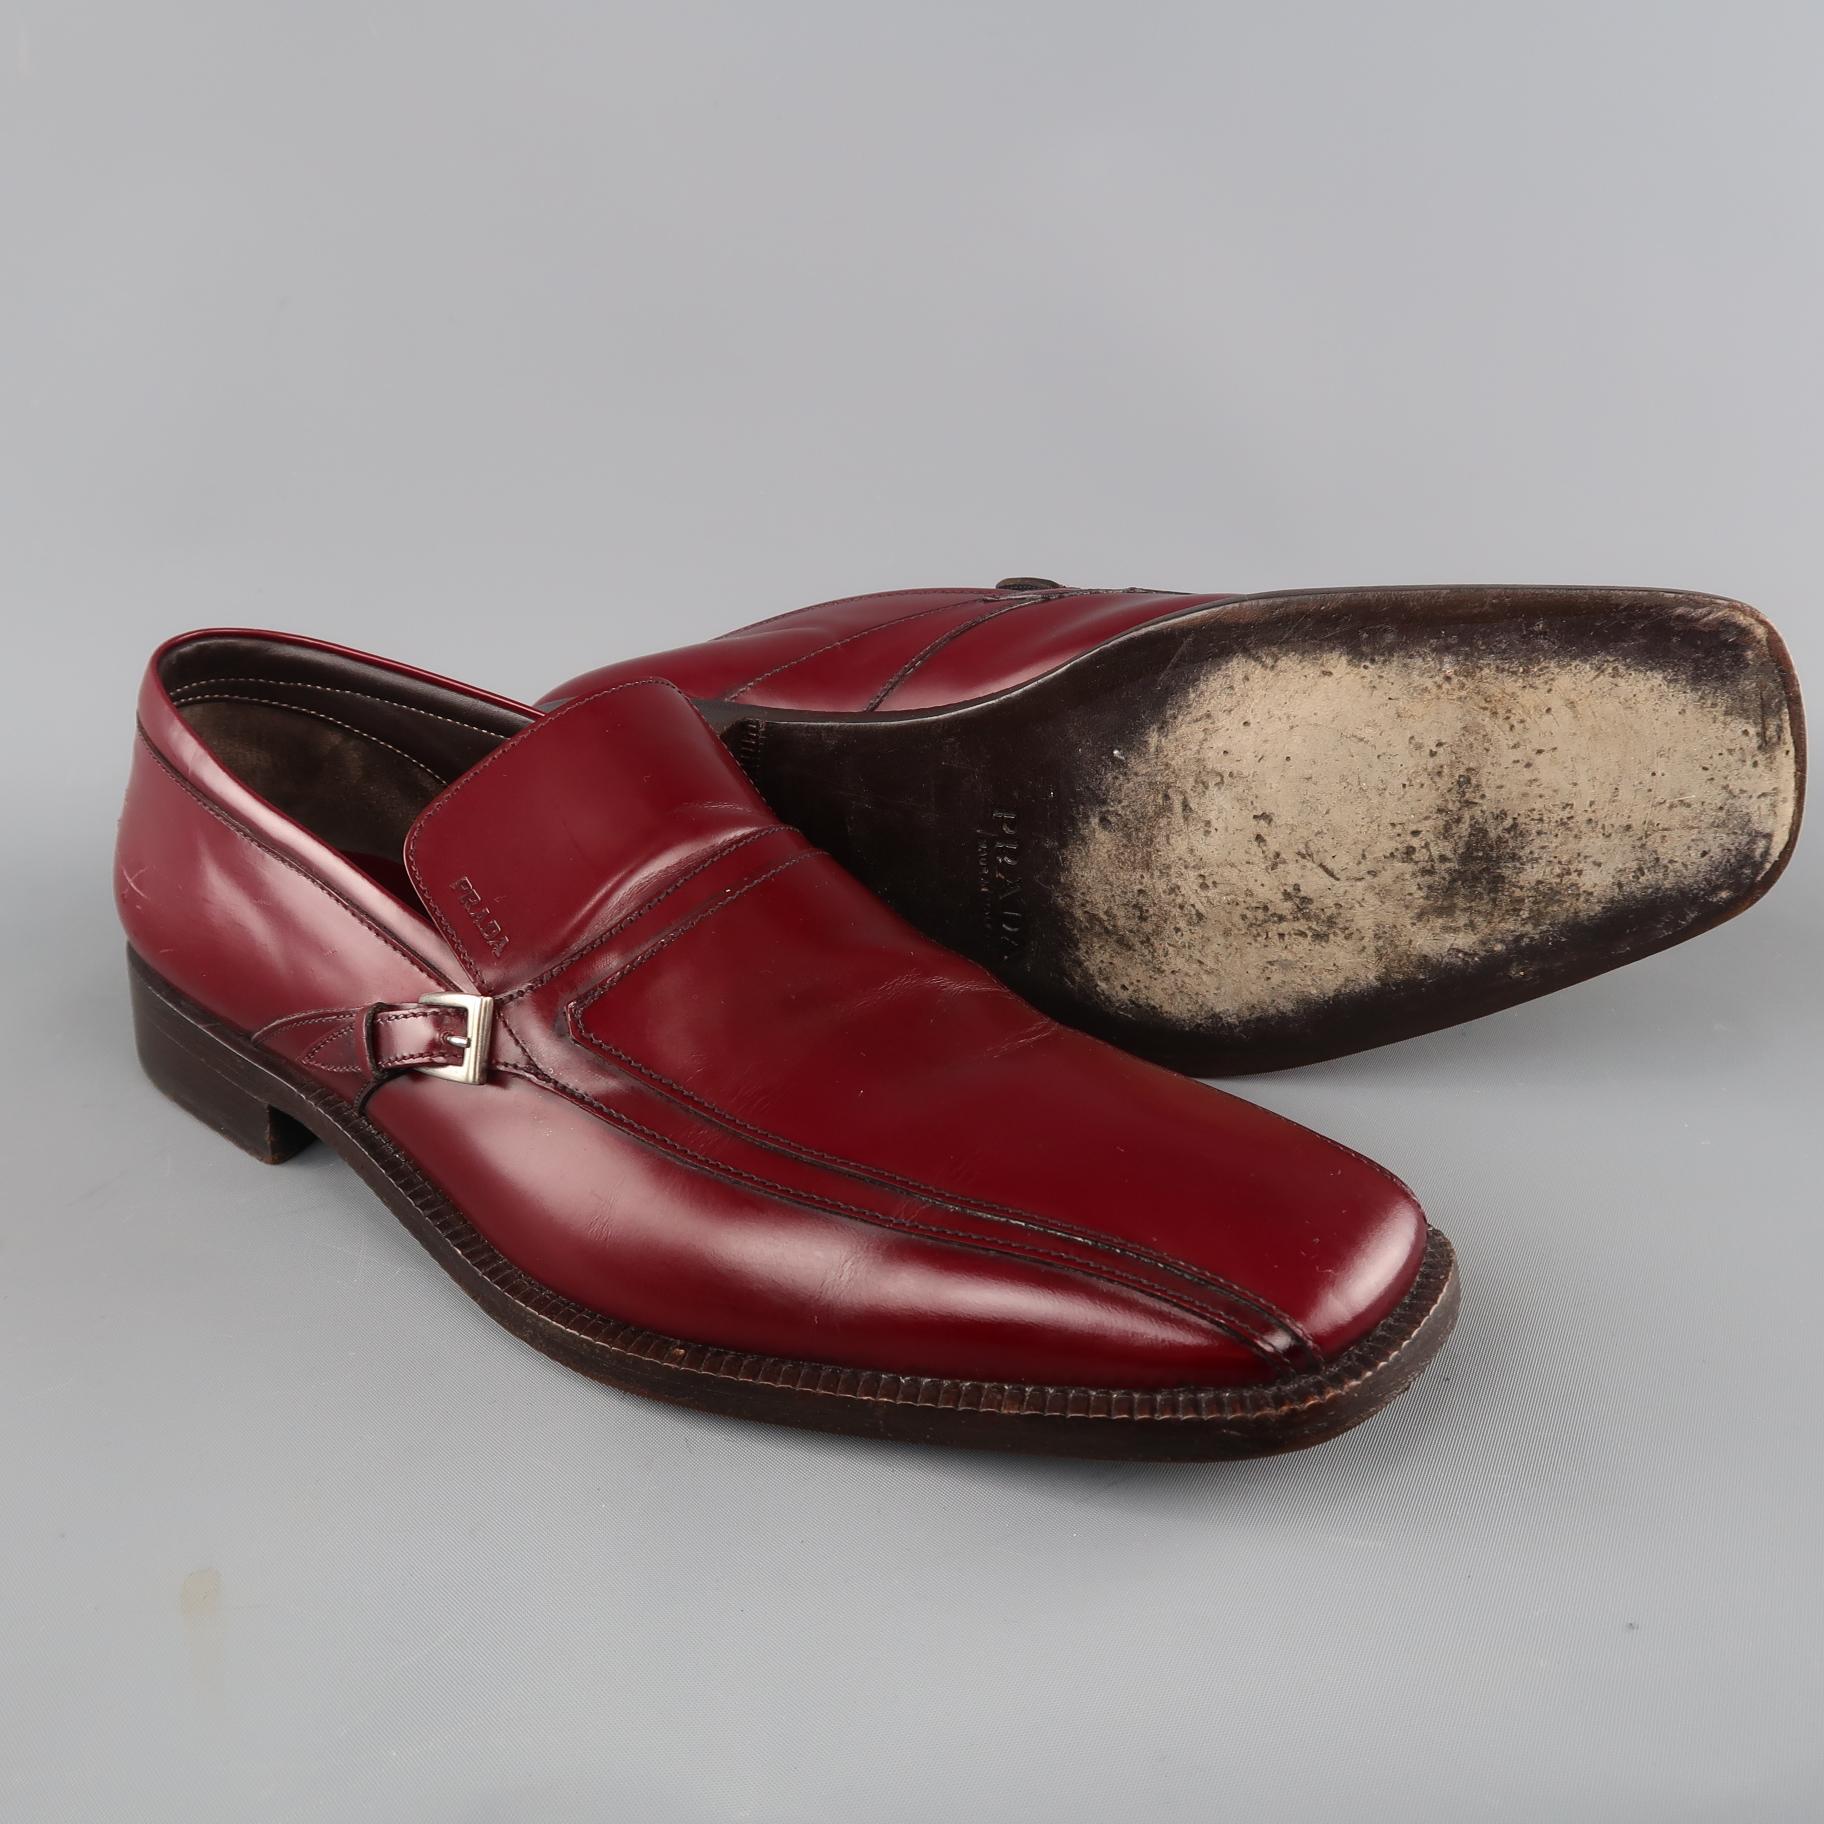 PRADA loafers come in burgundy leather with a square toe and buckle detail. With box. Made in Italy.
 
Excellent Pre-Owned Condition.
Marked: UK 10
 
Outsole: 12.80 x 4 in.